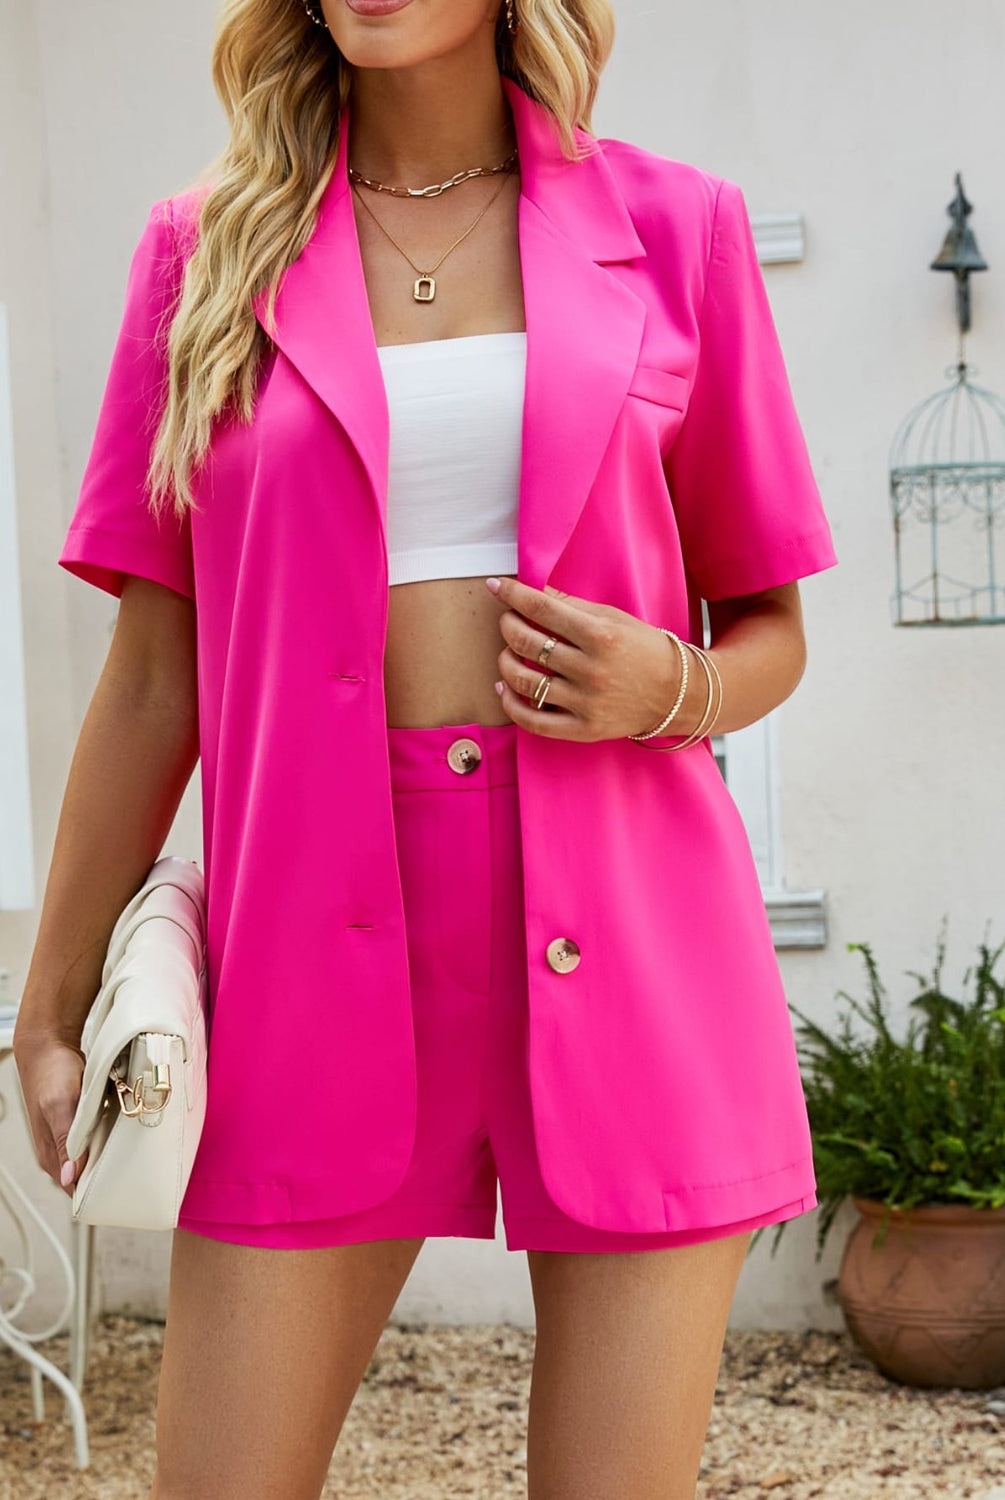 Maroon Barbie Swag Short Sleeve Blazer and Shorts Set Outfit Sets